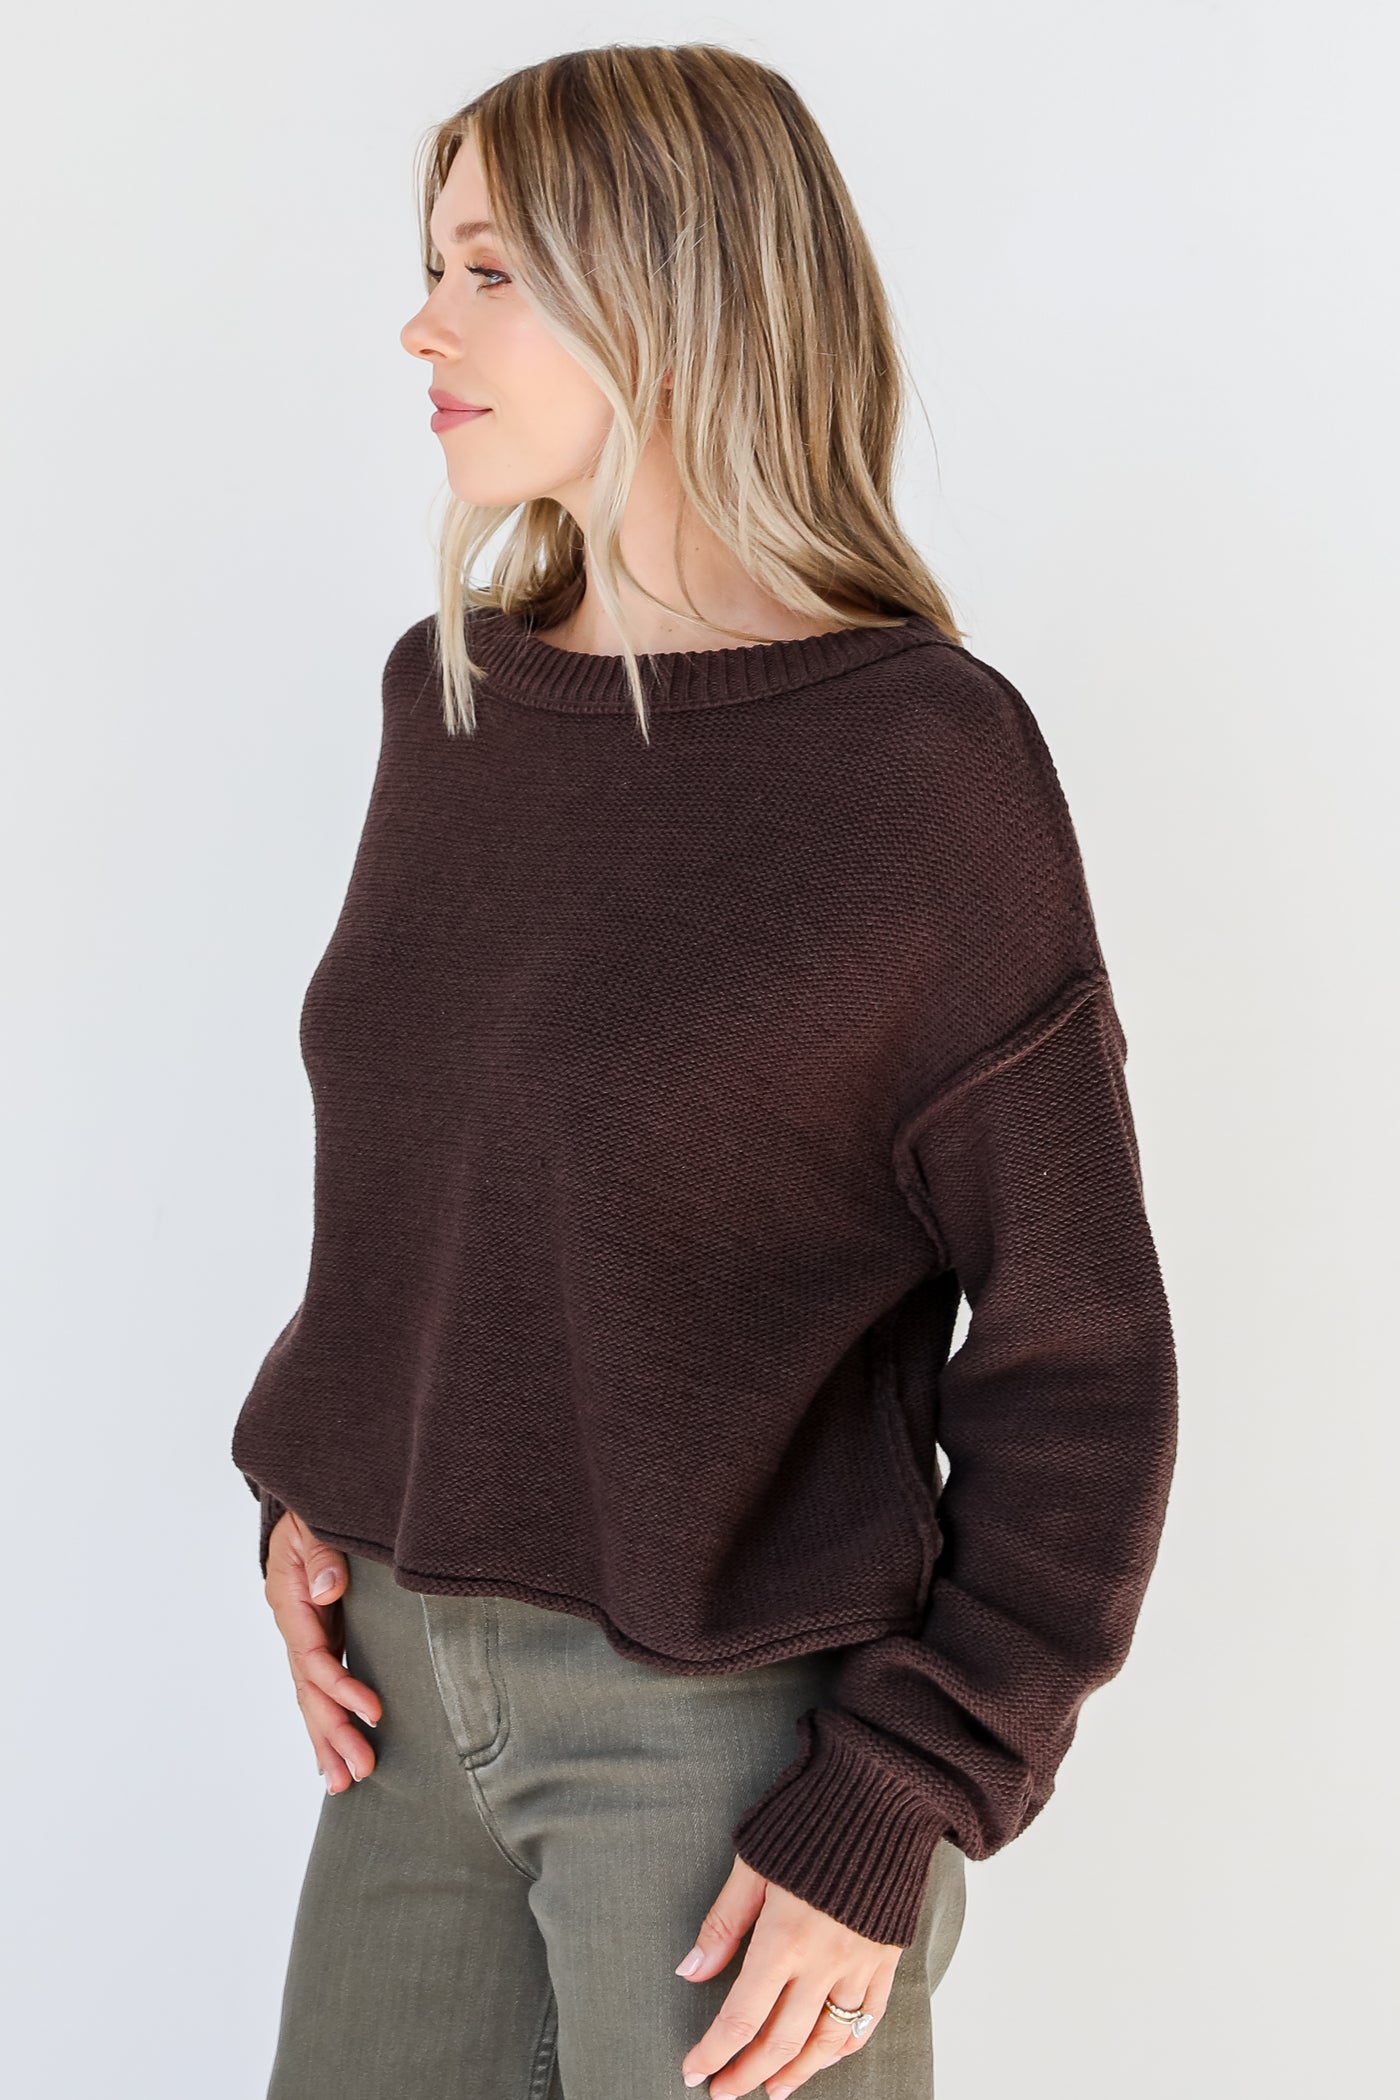 brown Sweater side view